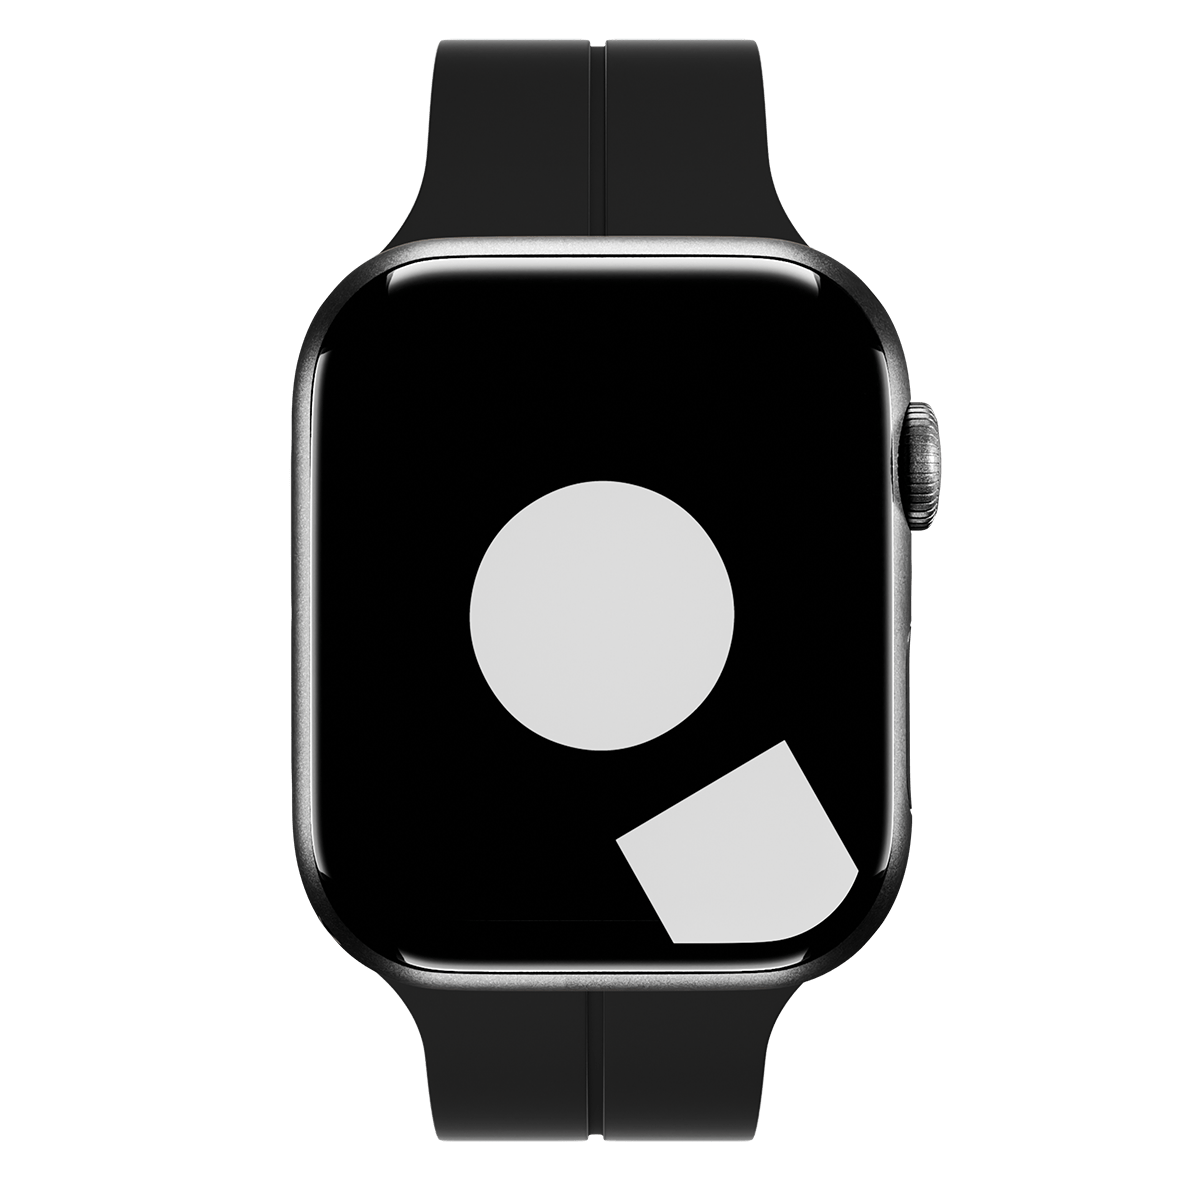 Black D-Buckle Sport Band for Apple Watch